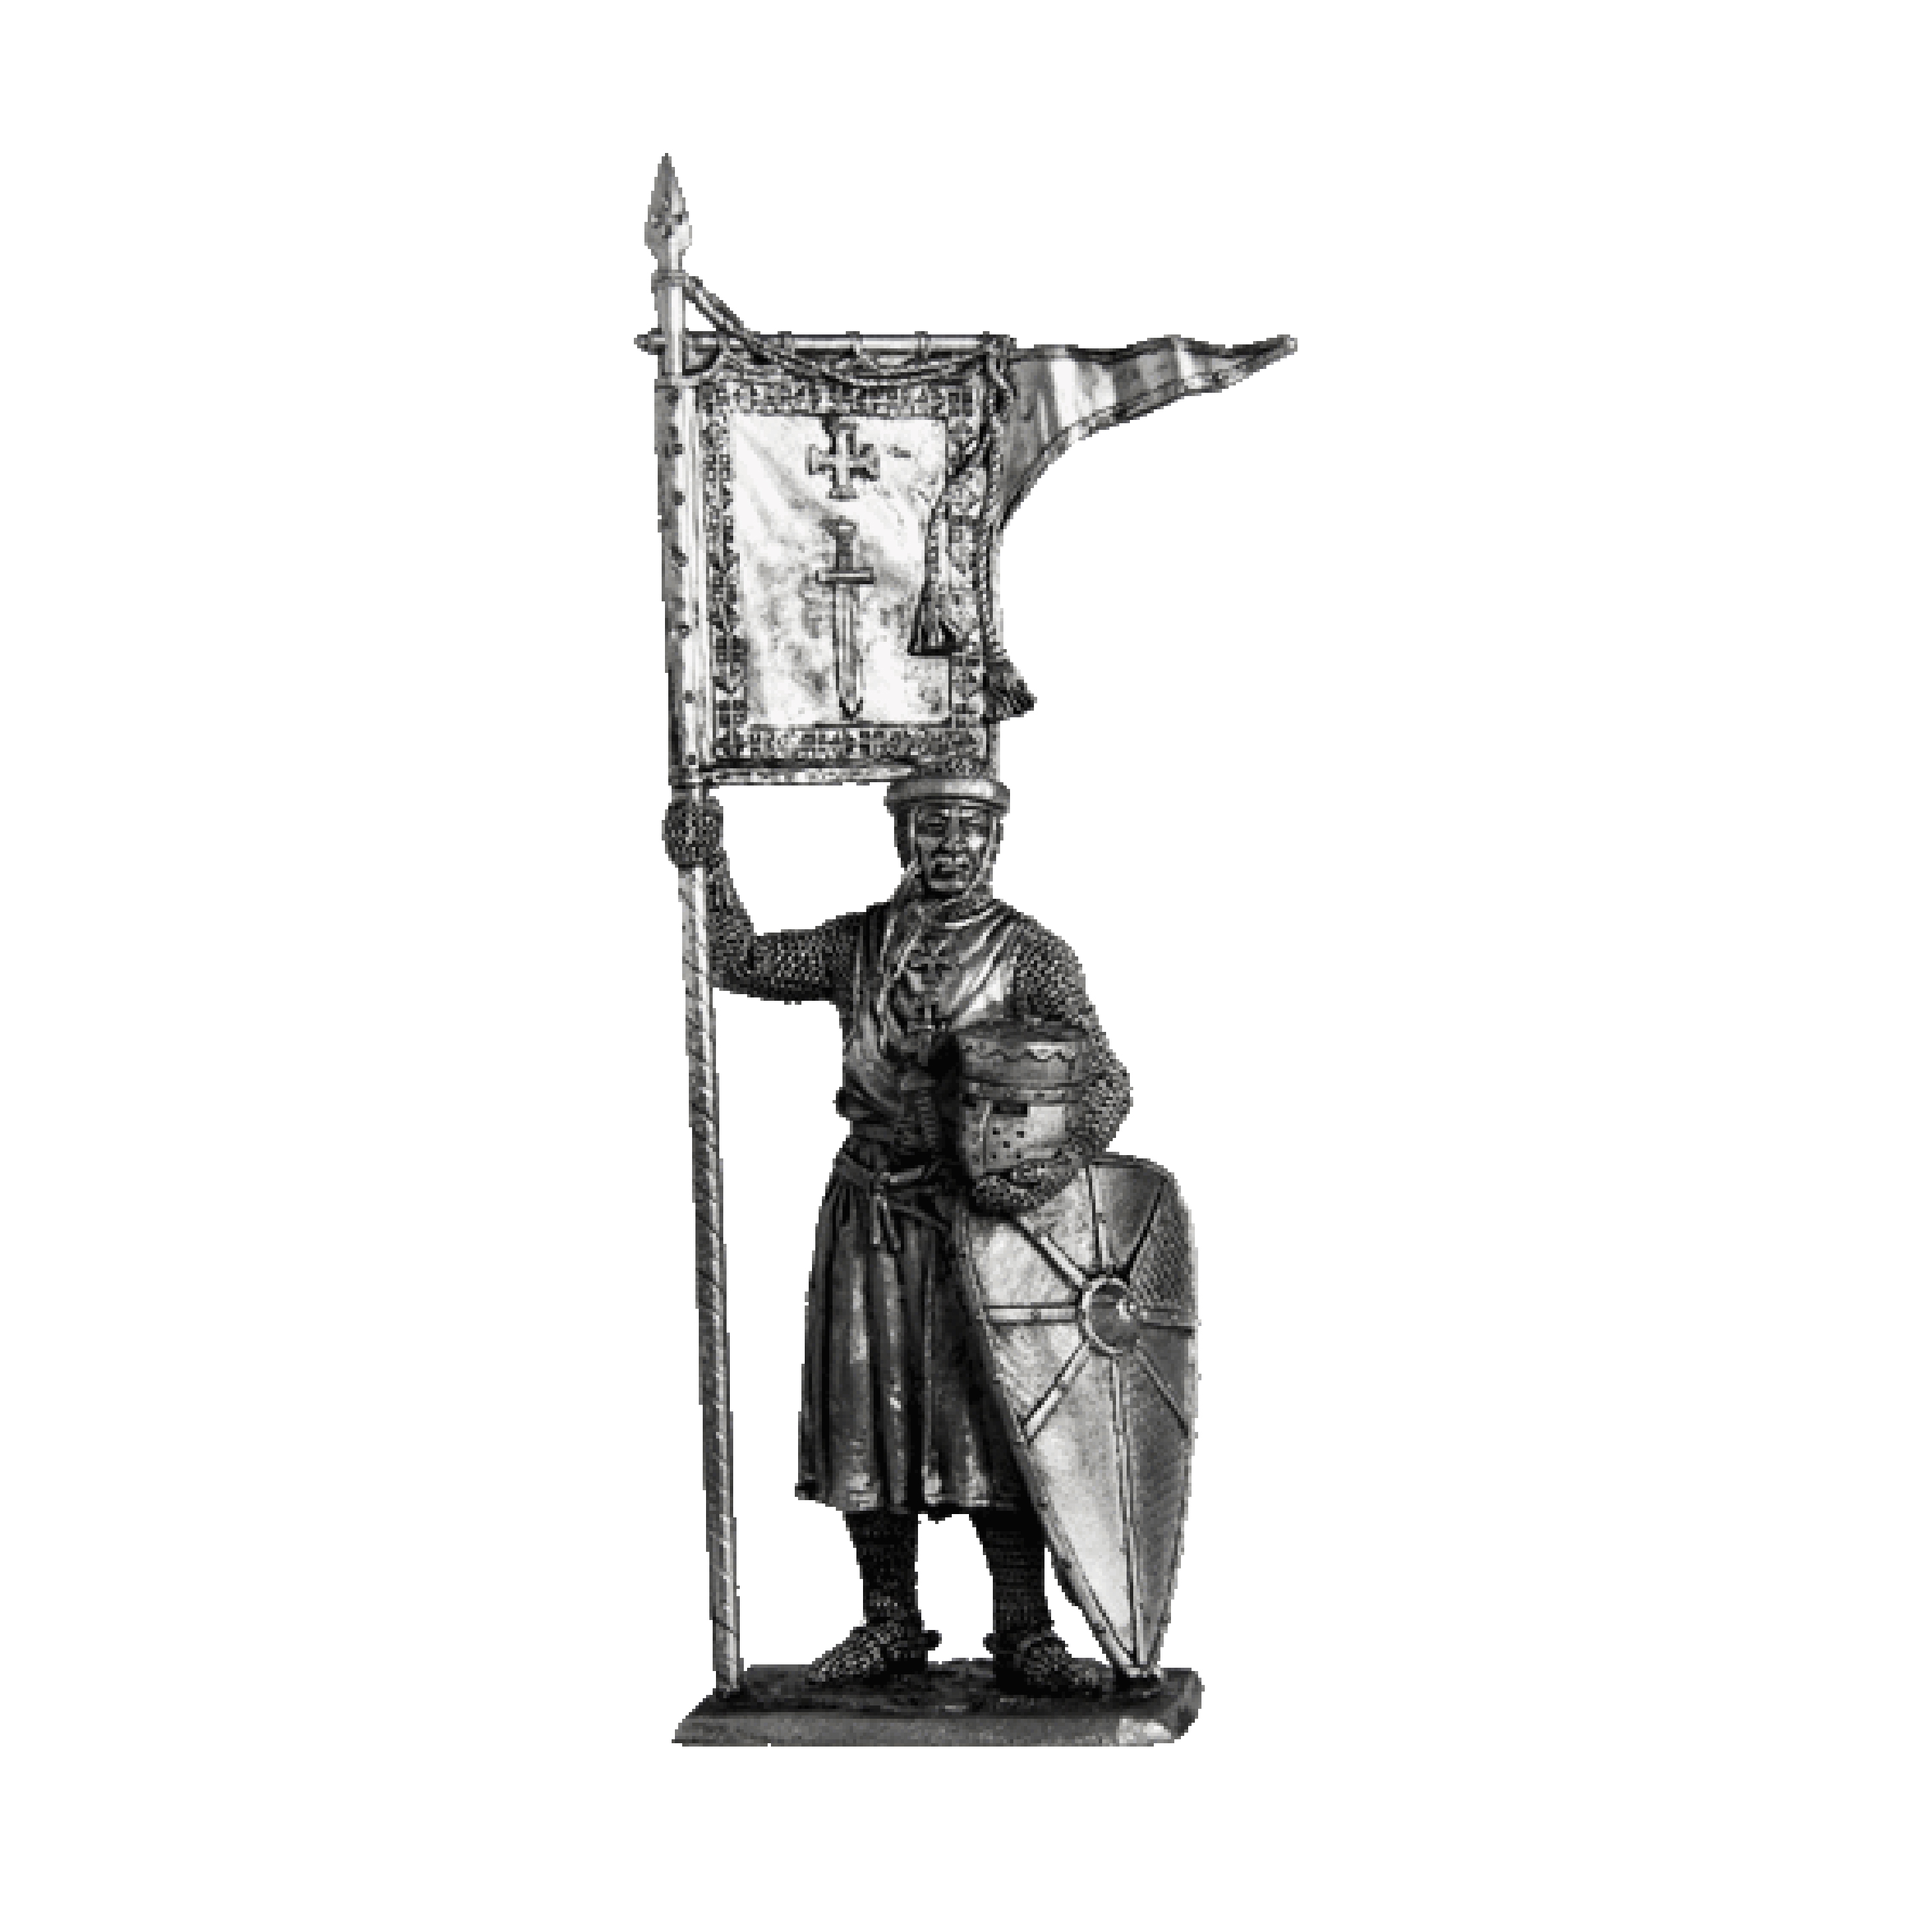 Knight of the Order of the Sword, 1202-1237